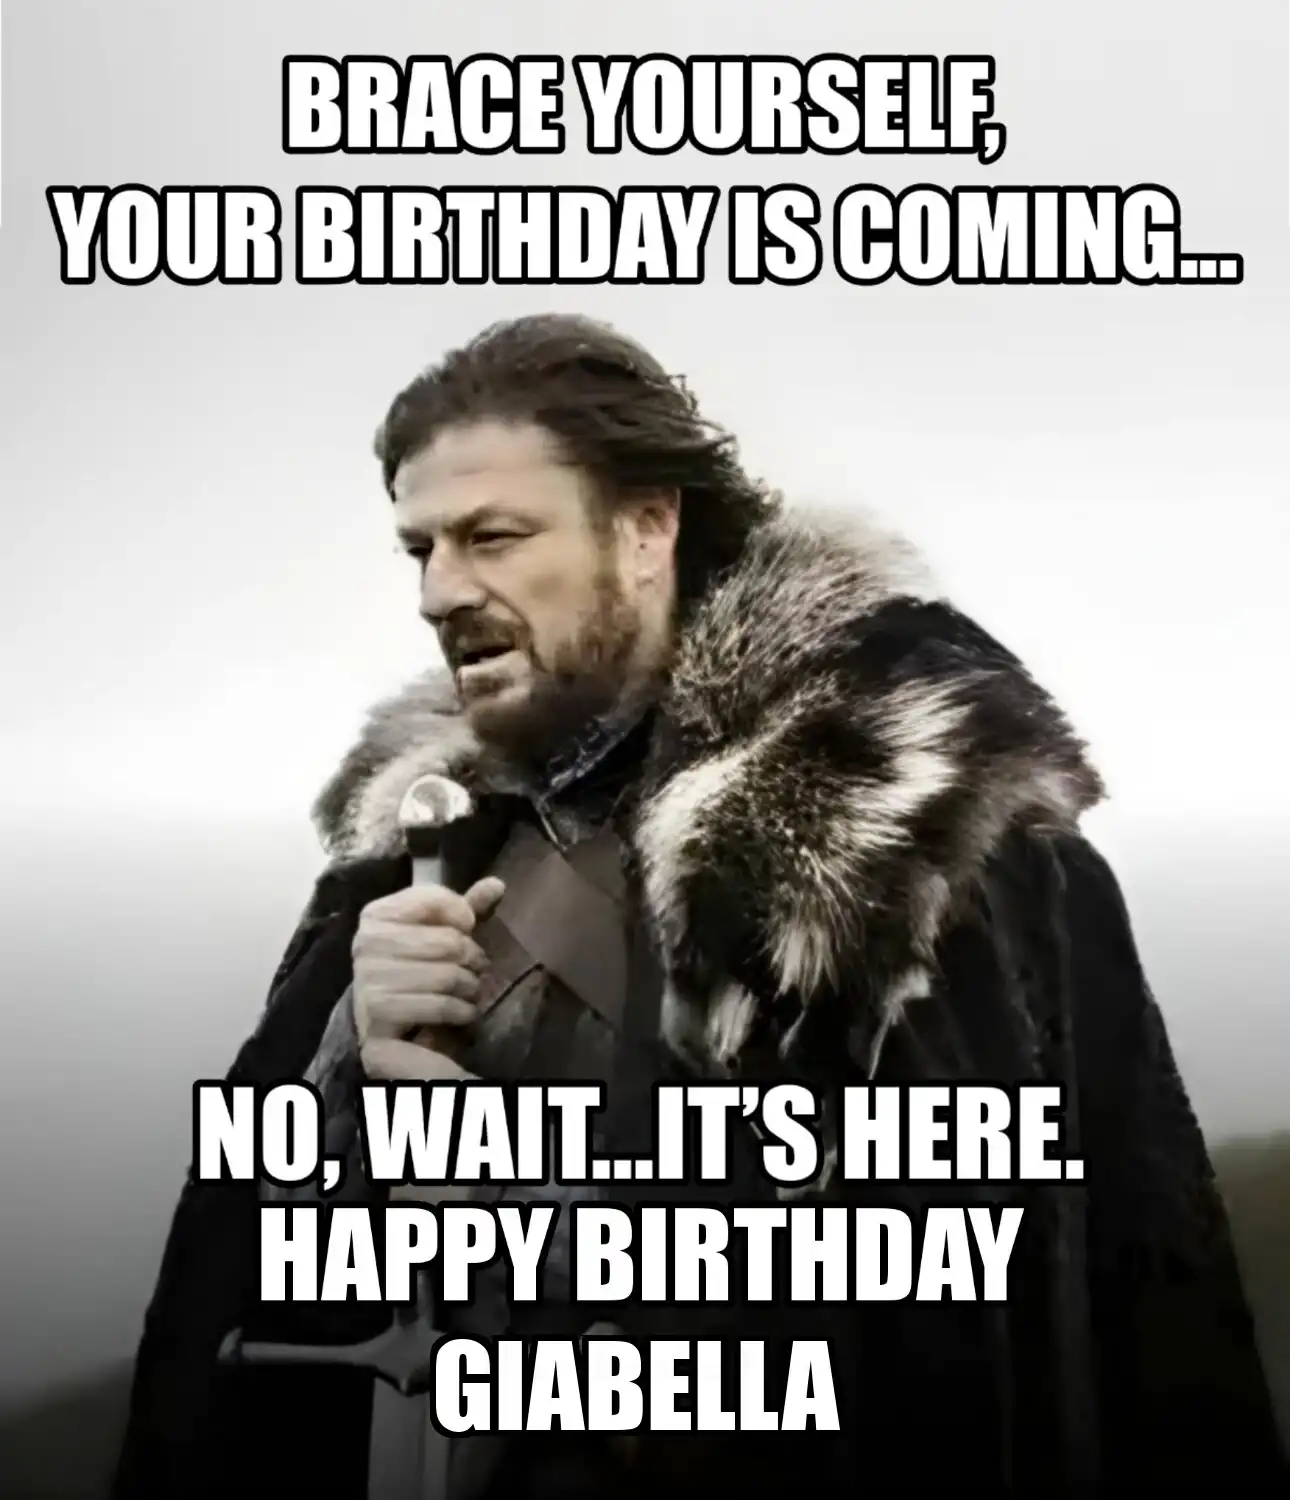 Happy Birthday Giabella Brace Yourself Your Birthday Is Coming Meme